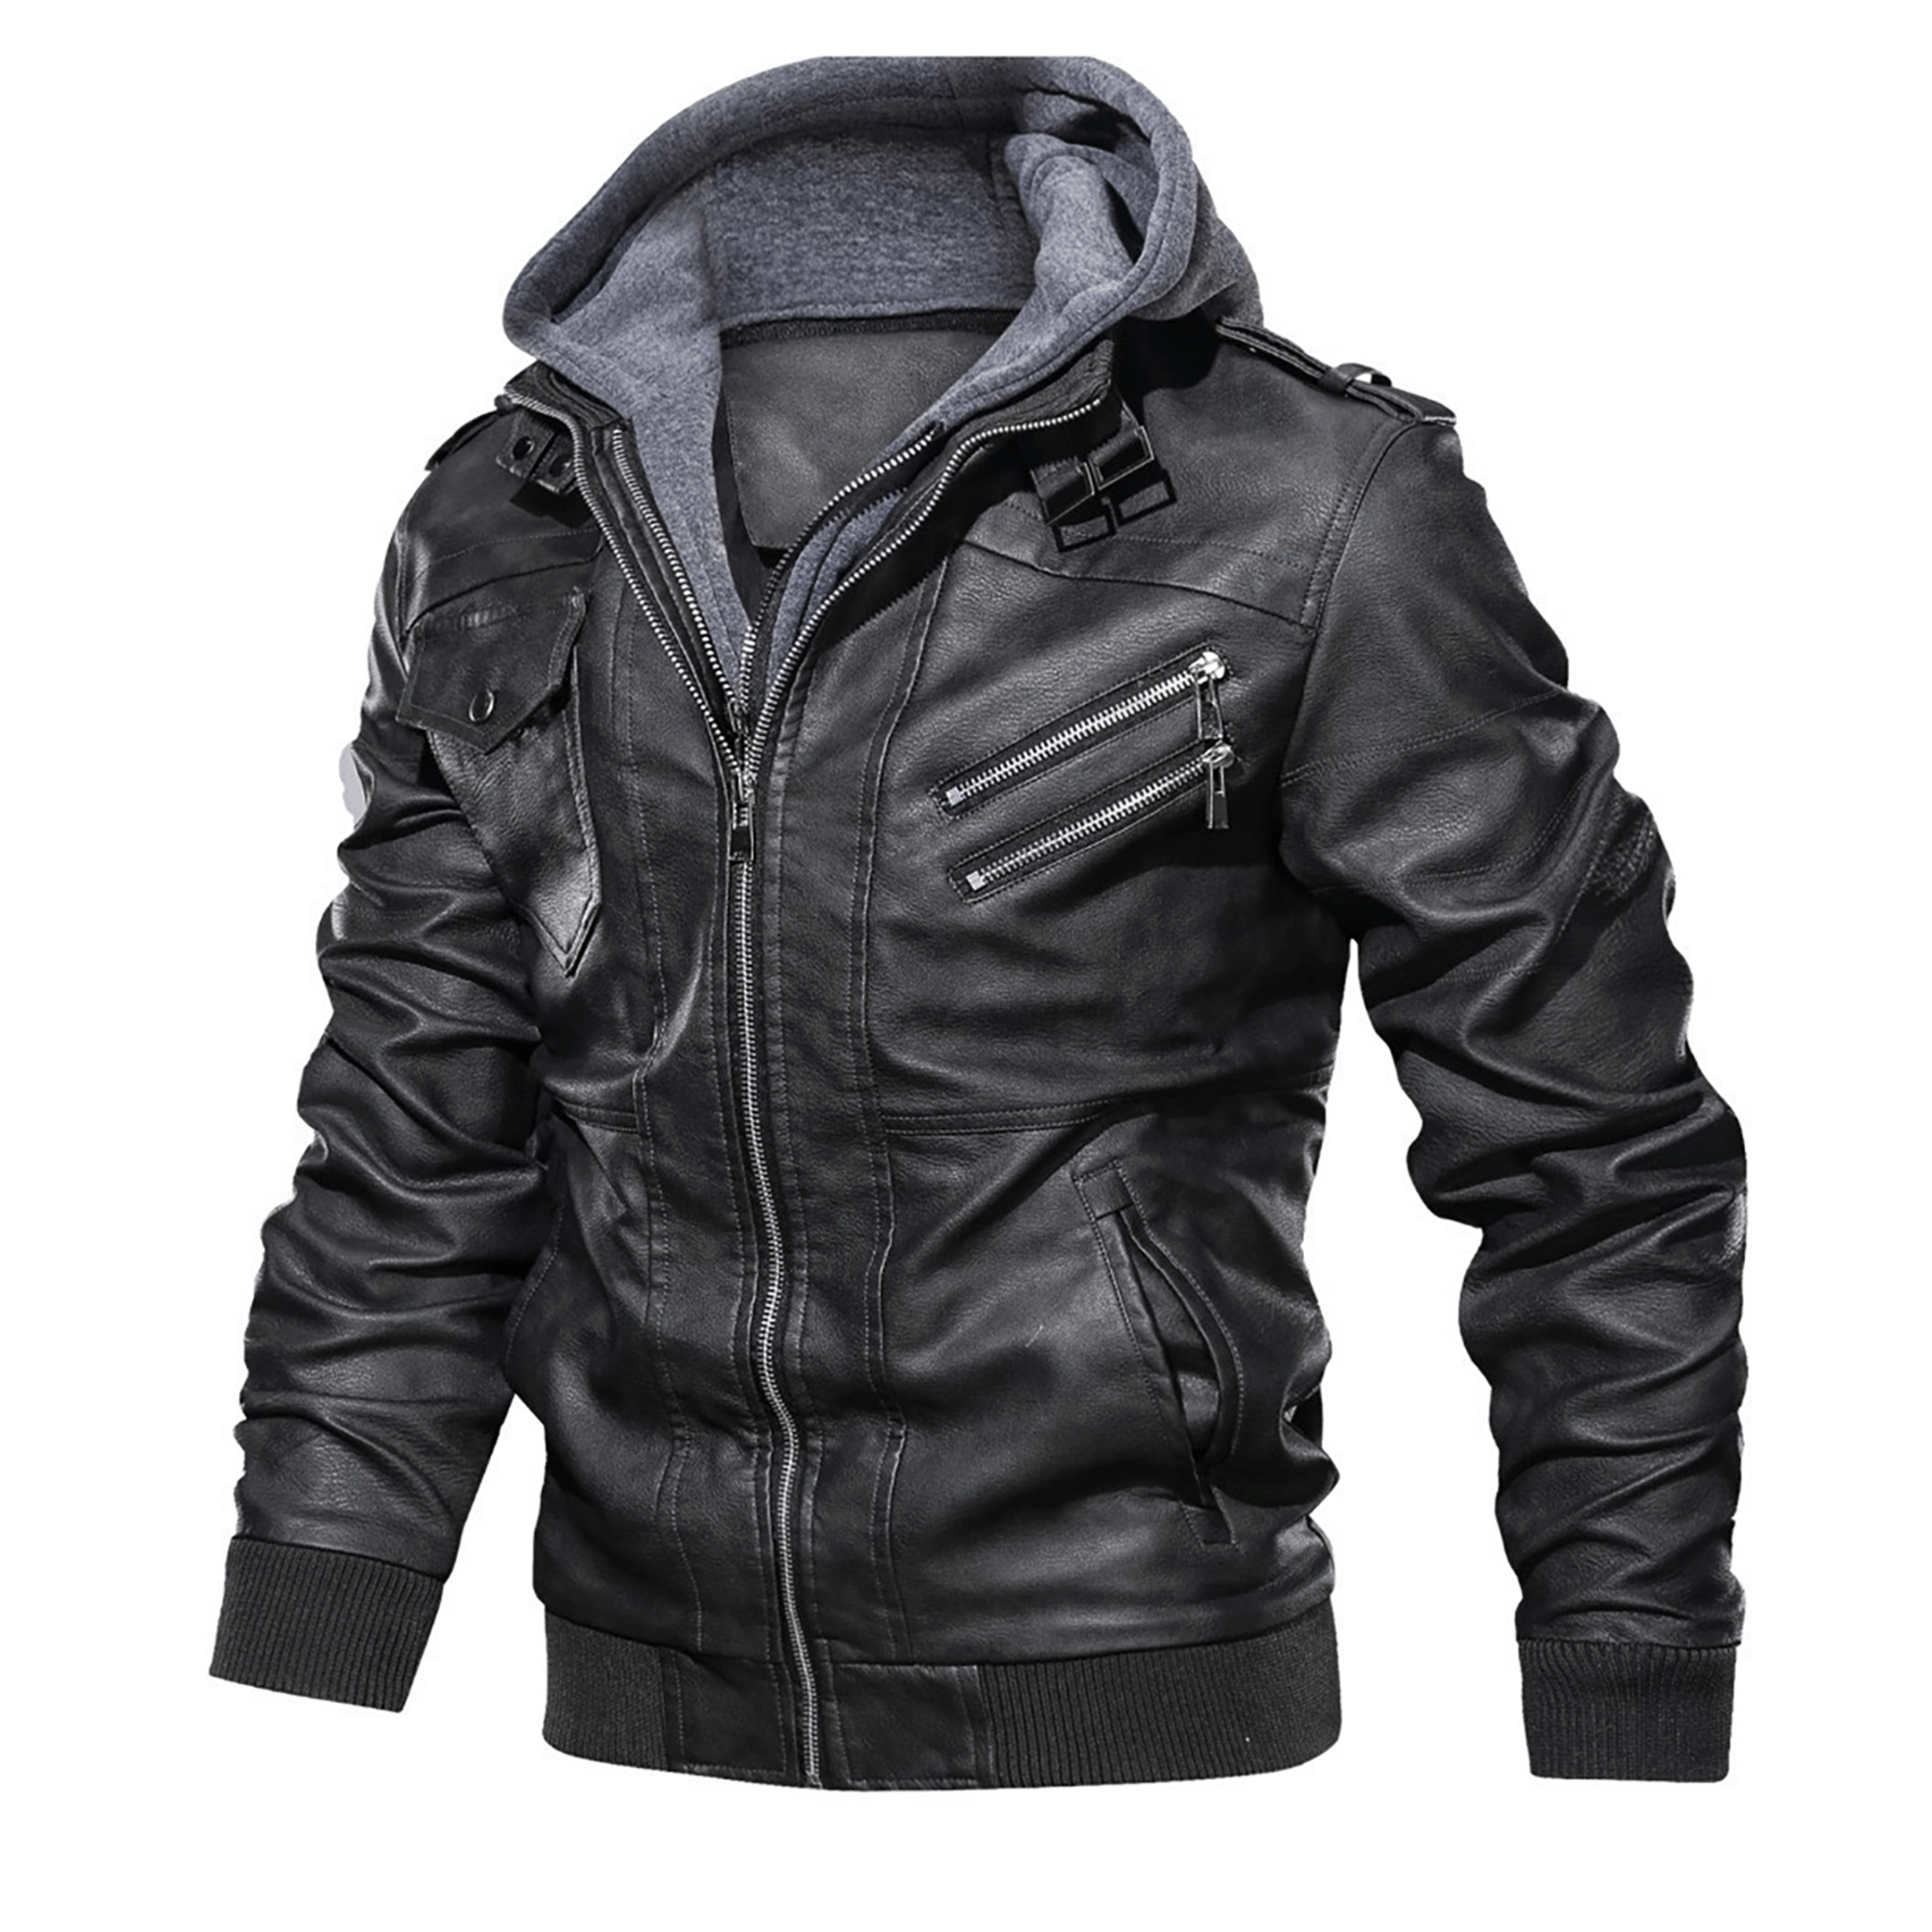 Top leather jackets and latest products 129